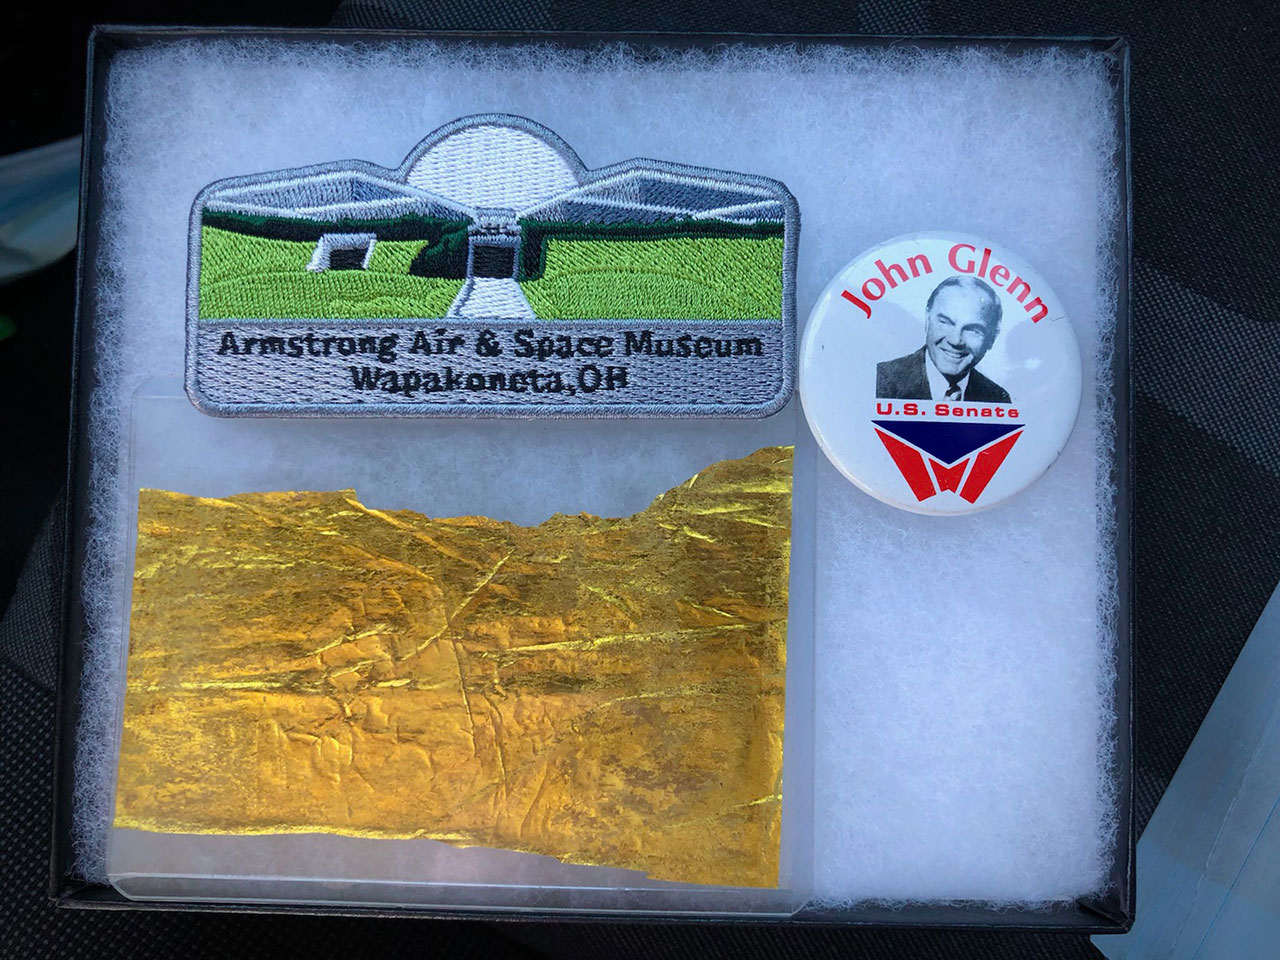 Ax-1 pilot Larry Connor is flying three items for the Armstrong Air & Space Museum, including a patch, a John Glenn campaign button and a segment of Kapton foil removed from the Apollo 11 command module that flew to the moon.